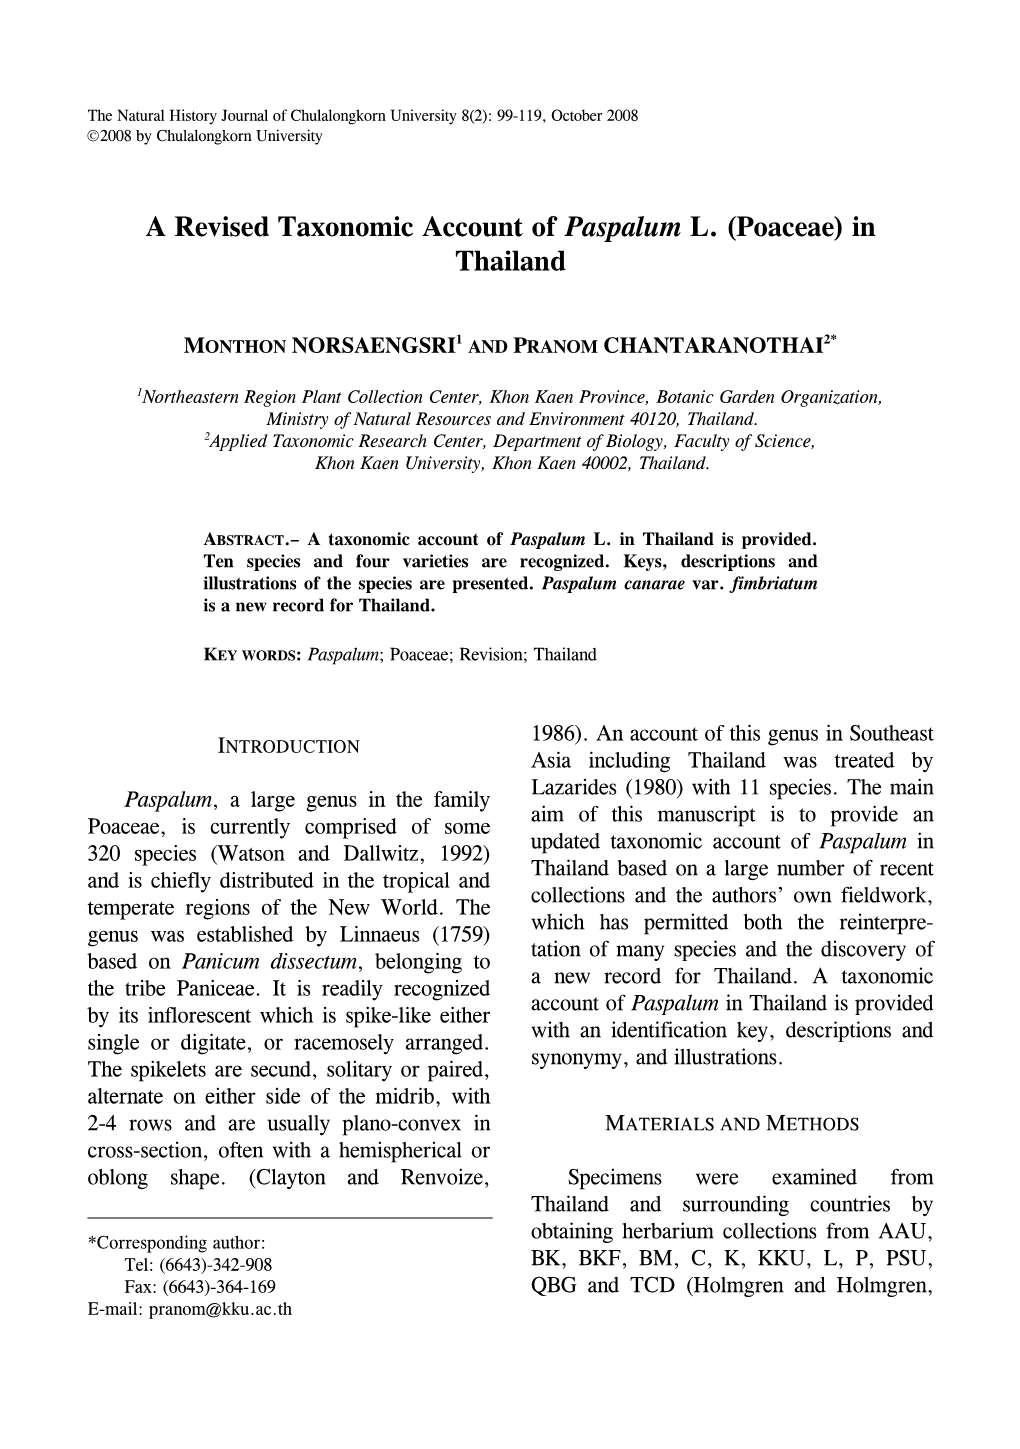 A Revised Taxonomic Account of Paspalum L. (Poaceae) in Thailand